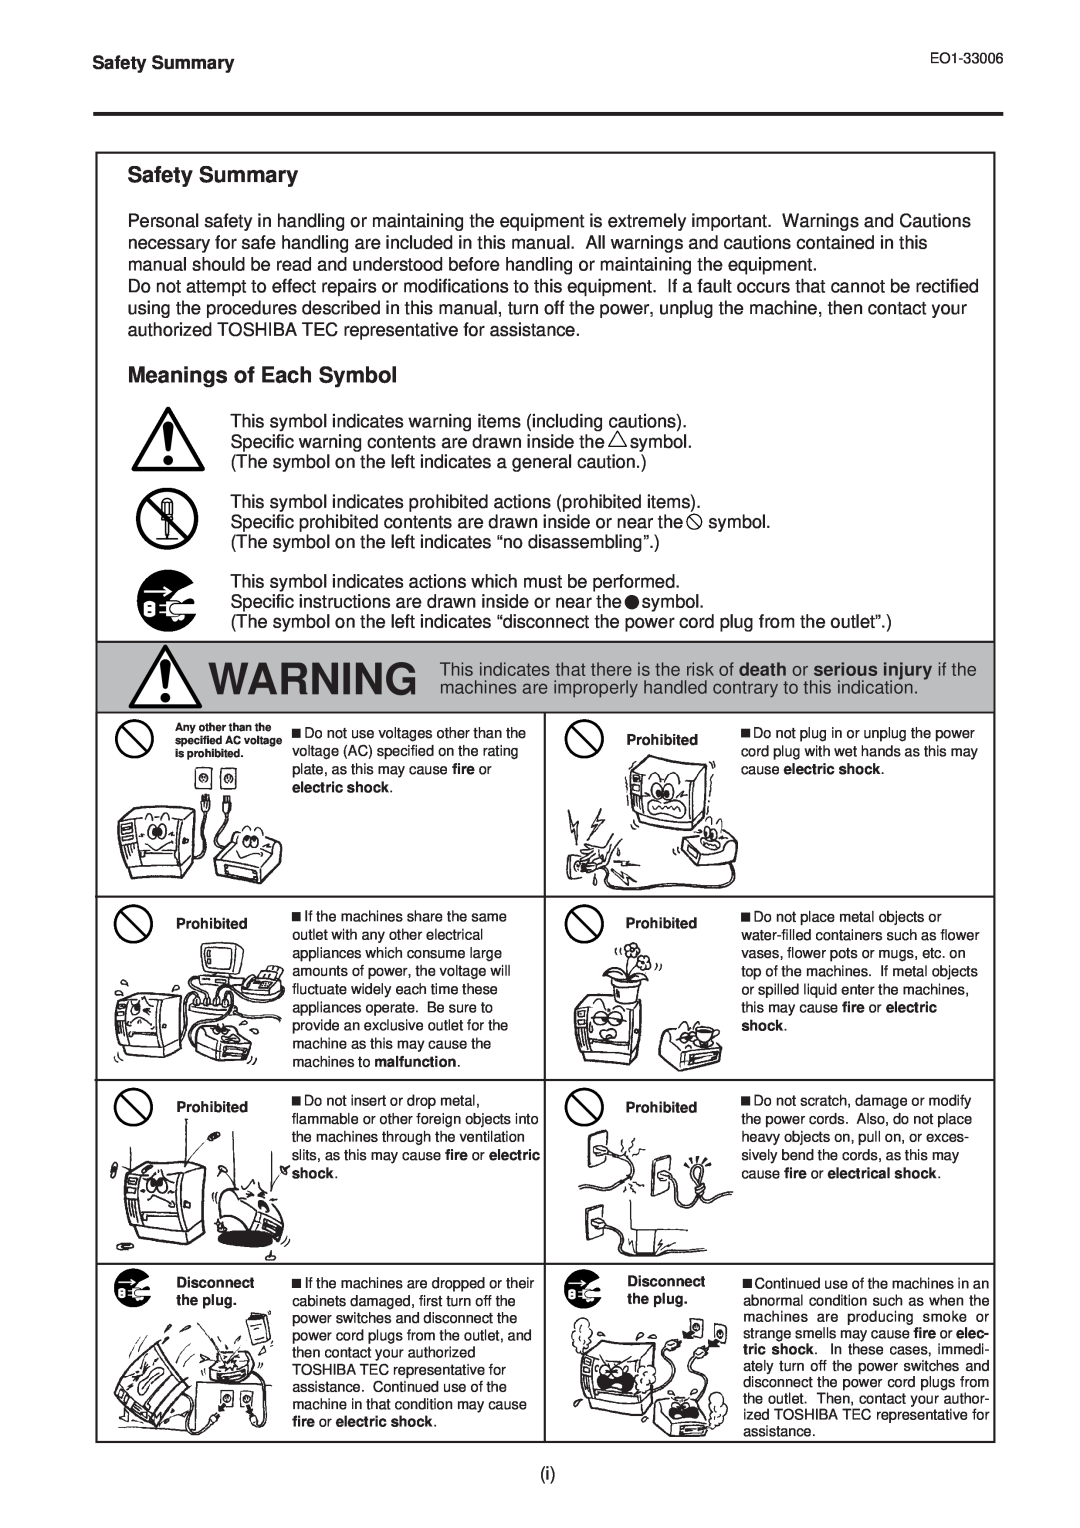 Toshiba B-450-QQ owner manual Safety Summary, Meanings of Each Symbol 